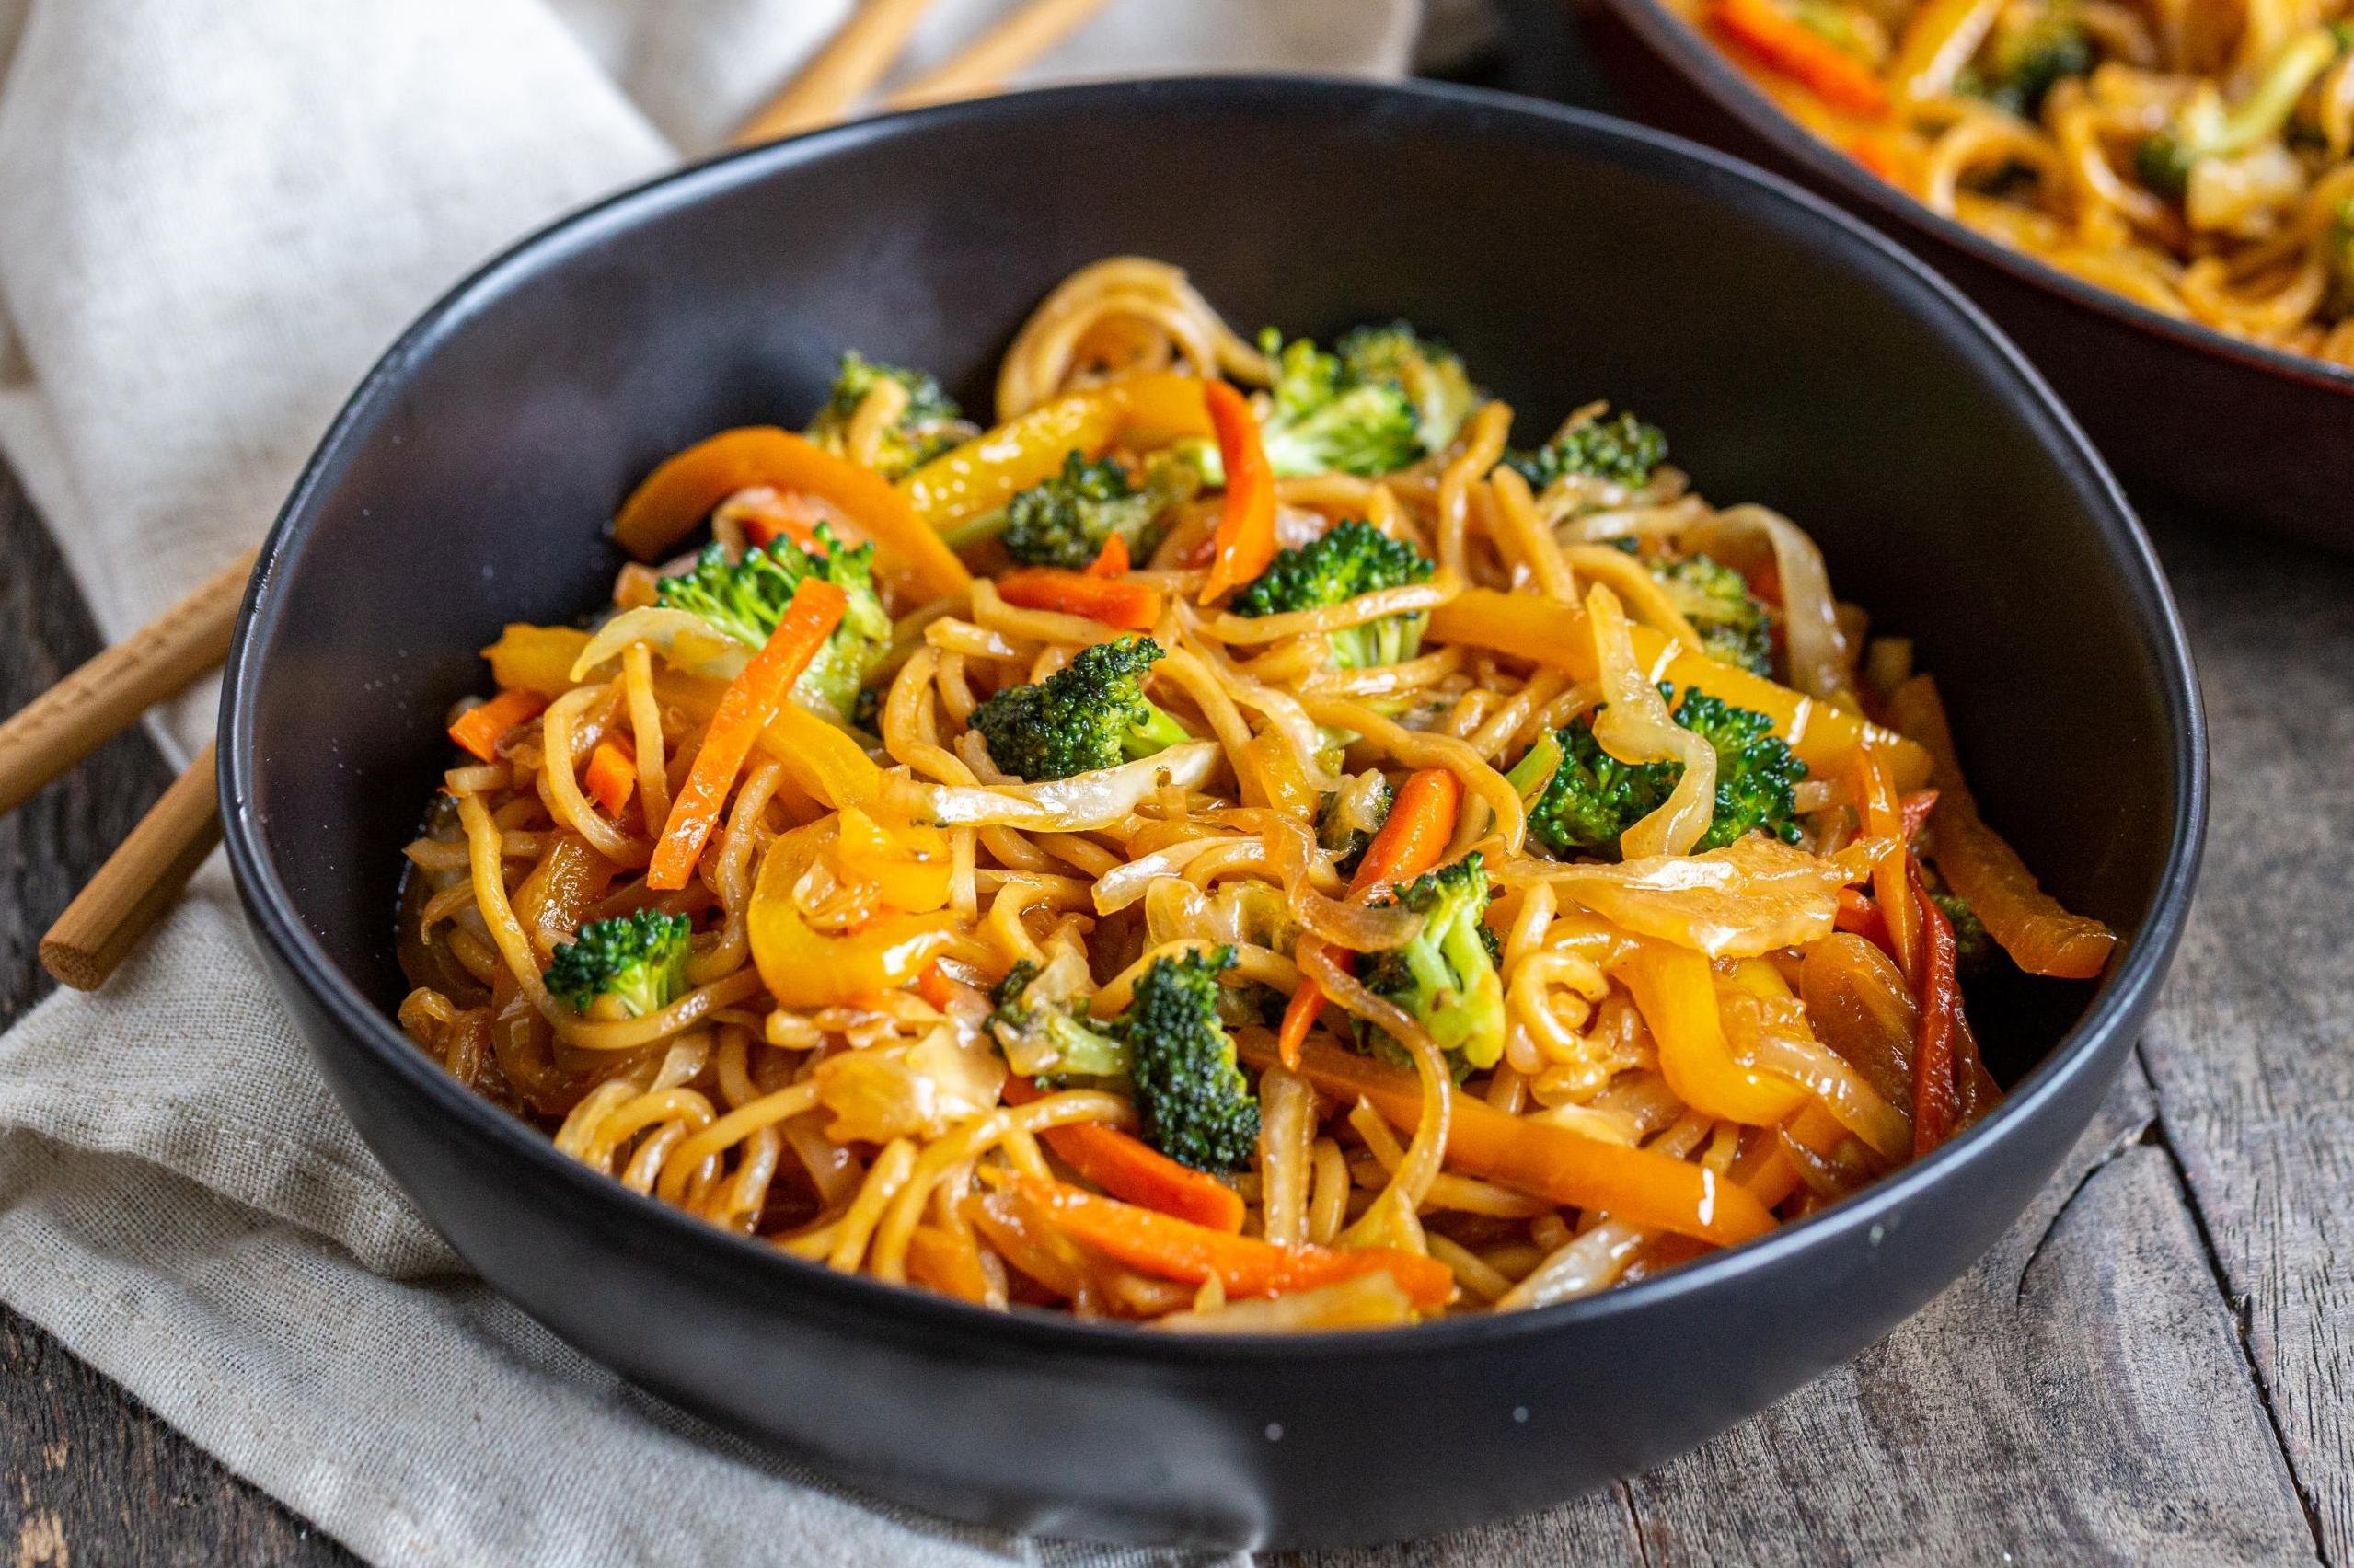  Unleash your inner chef with this easy-to-follow vegetarian Yakisoba recipe.